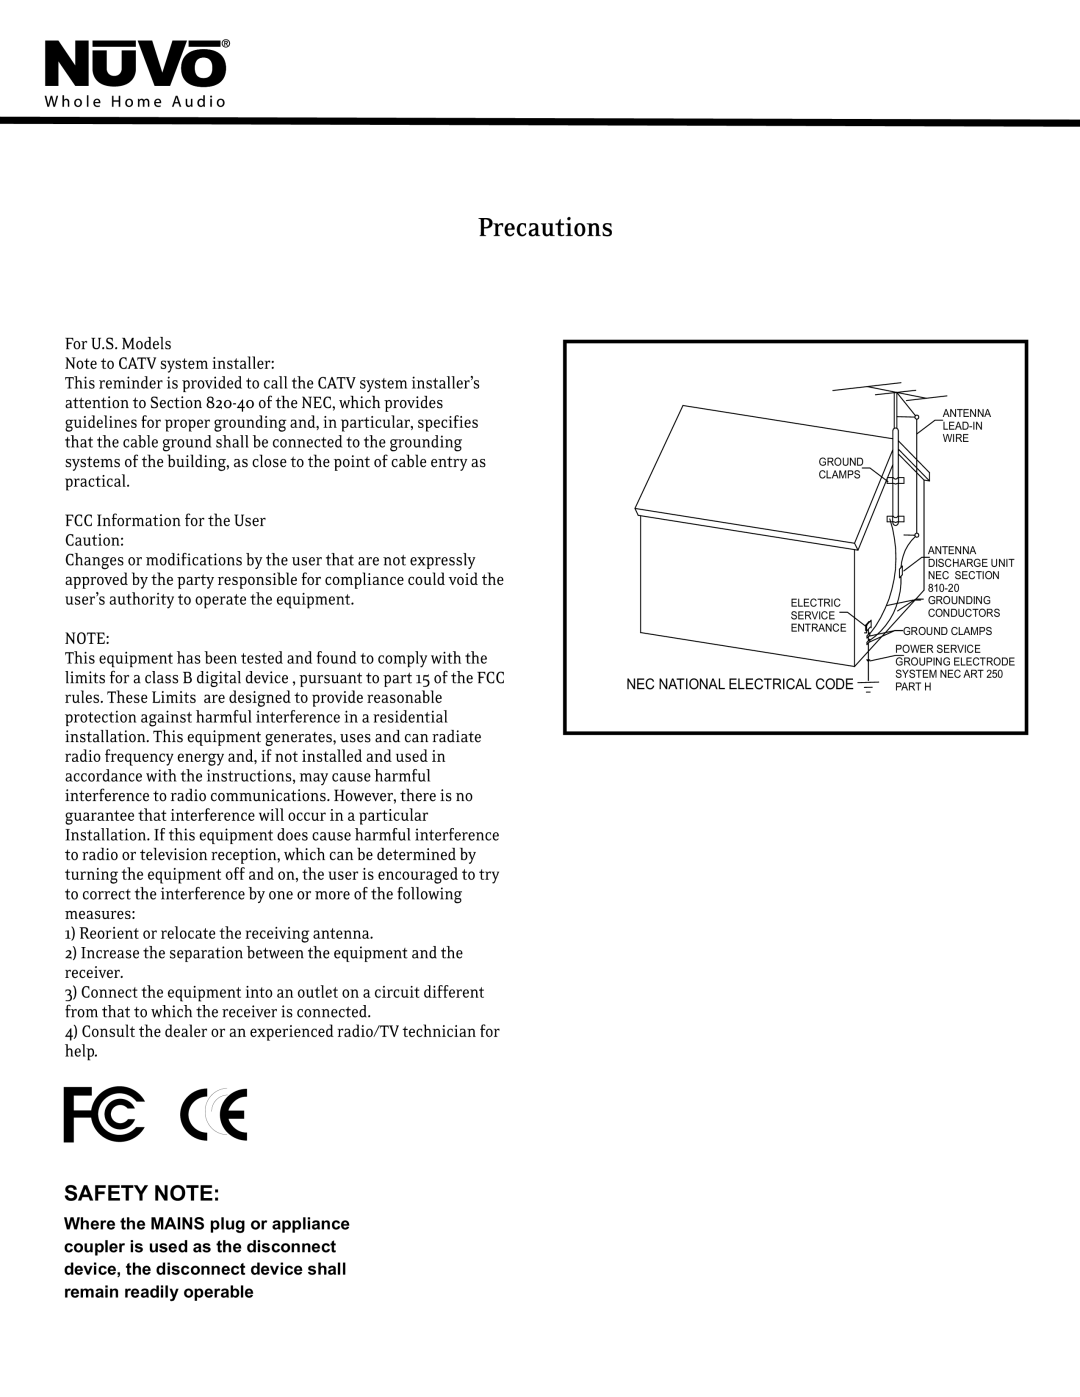 Nuvo NV-MPS4 manual Safety Note, Nec National Electrical Code 